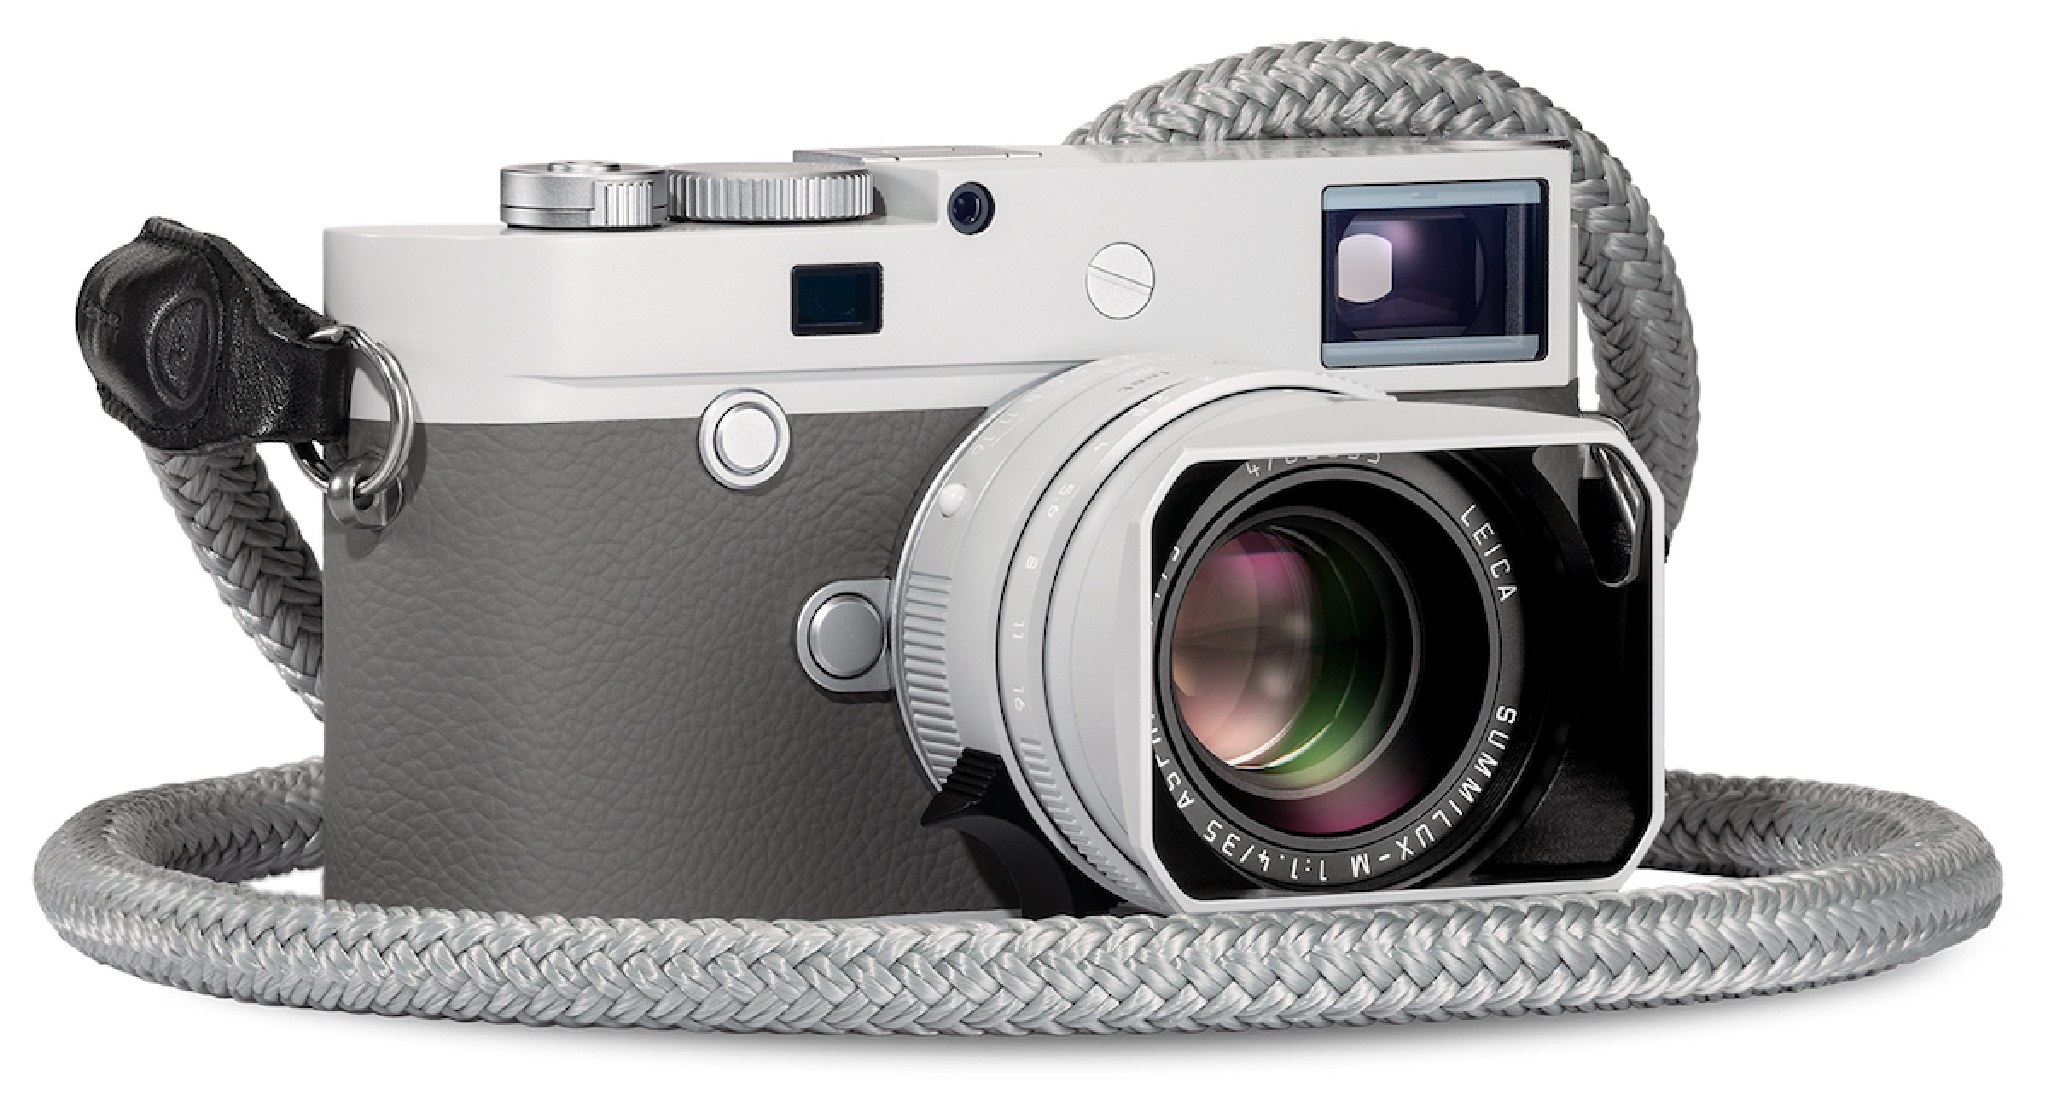 Leica-M10-P-Ghost-limited-edition-camera-1.jpg